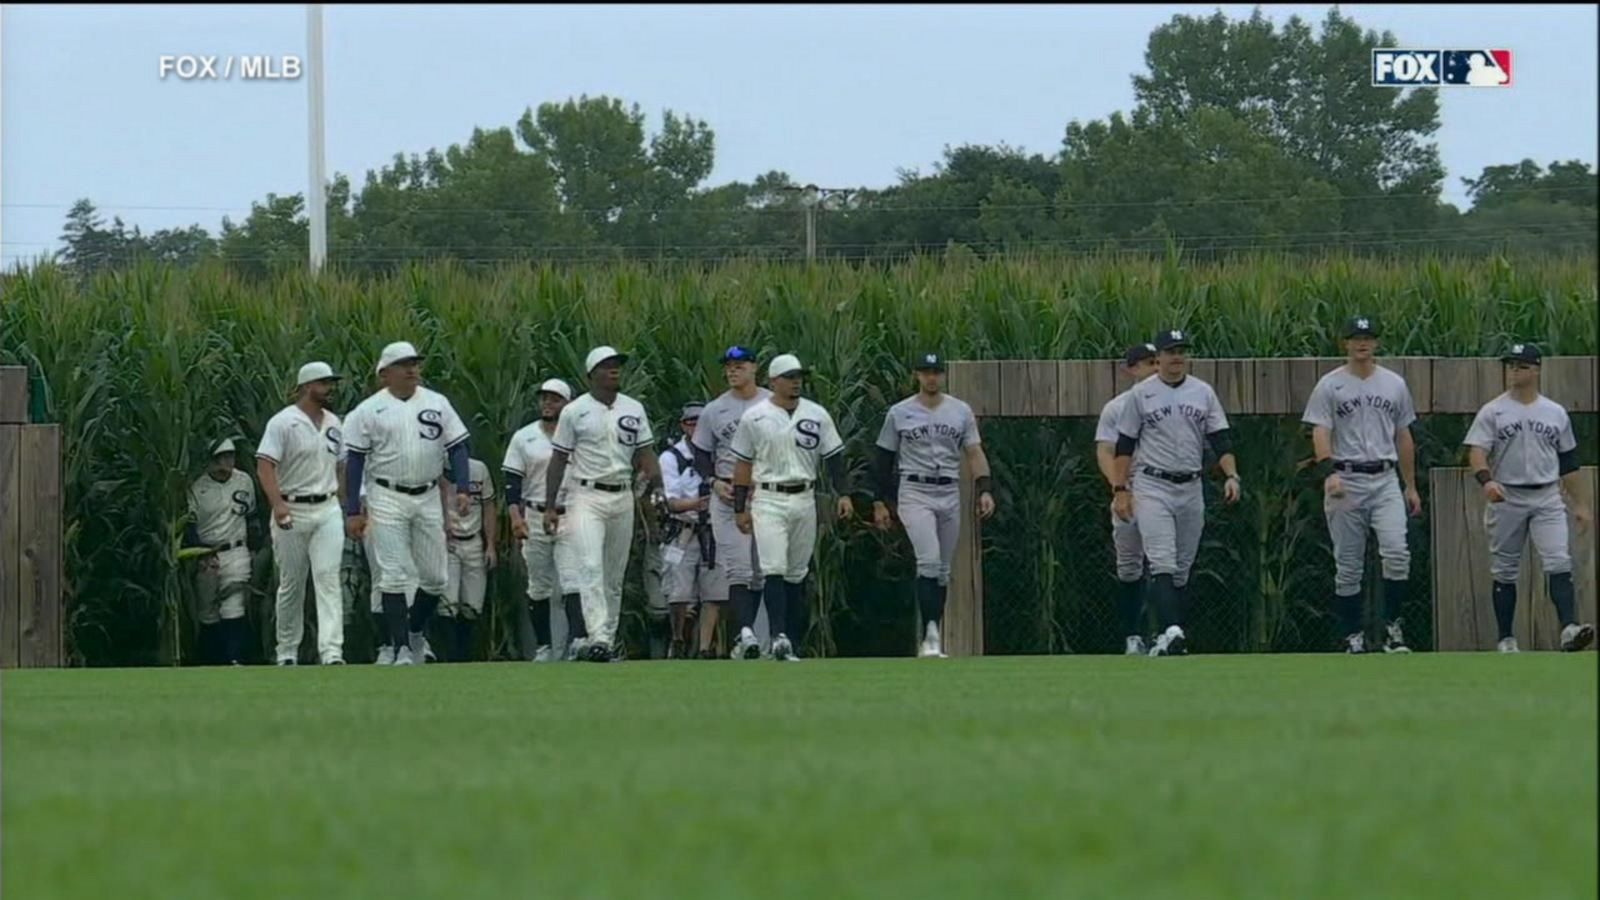 Look: MLB Field of Dreams uniforms for Yankees, White Sox